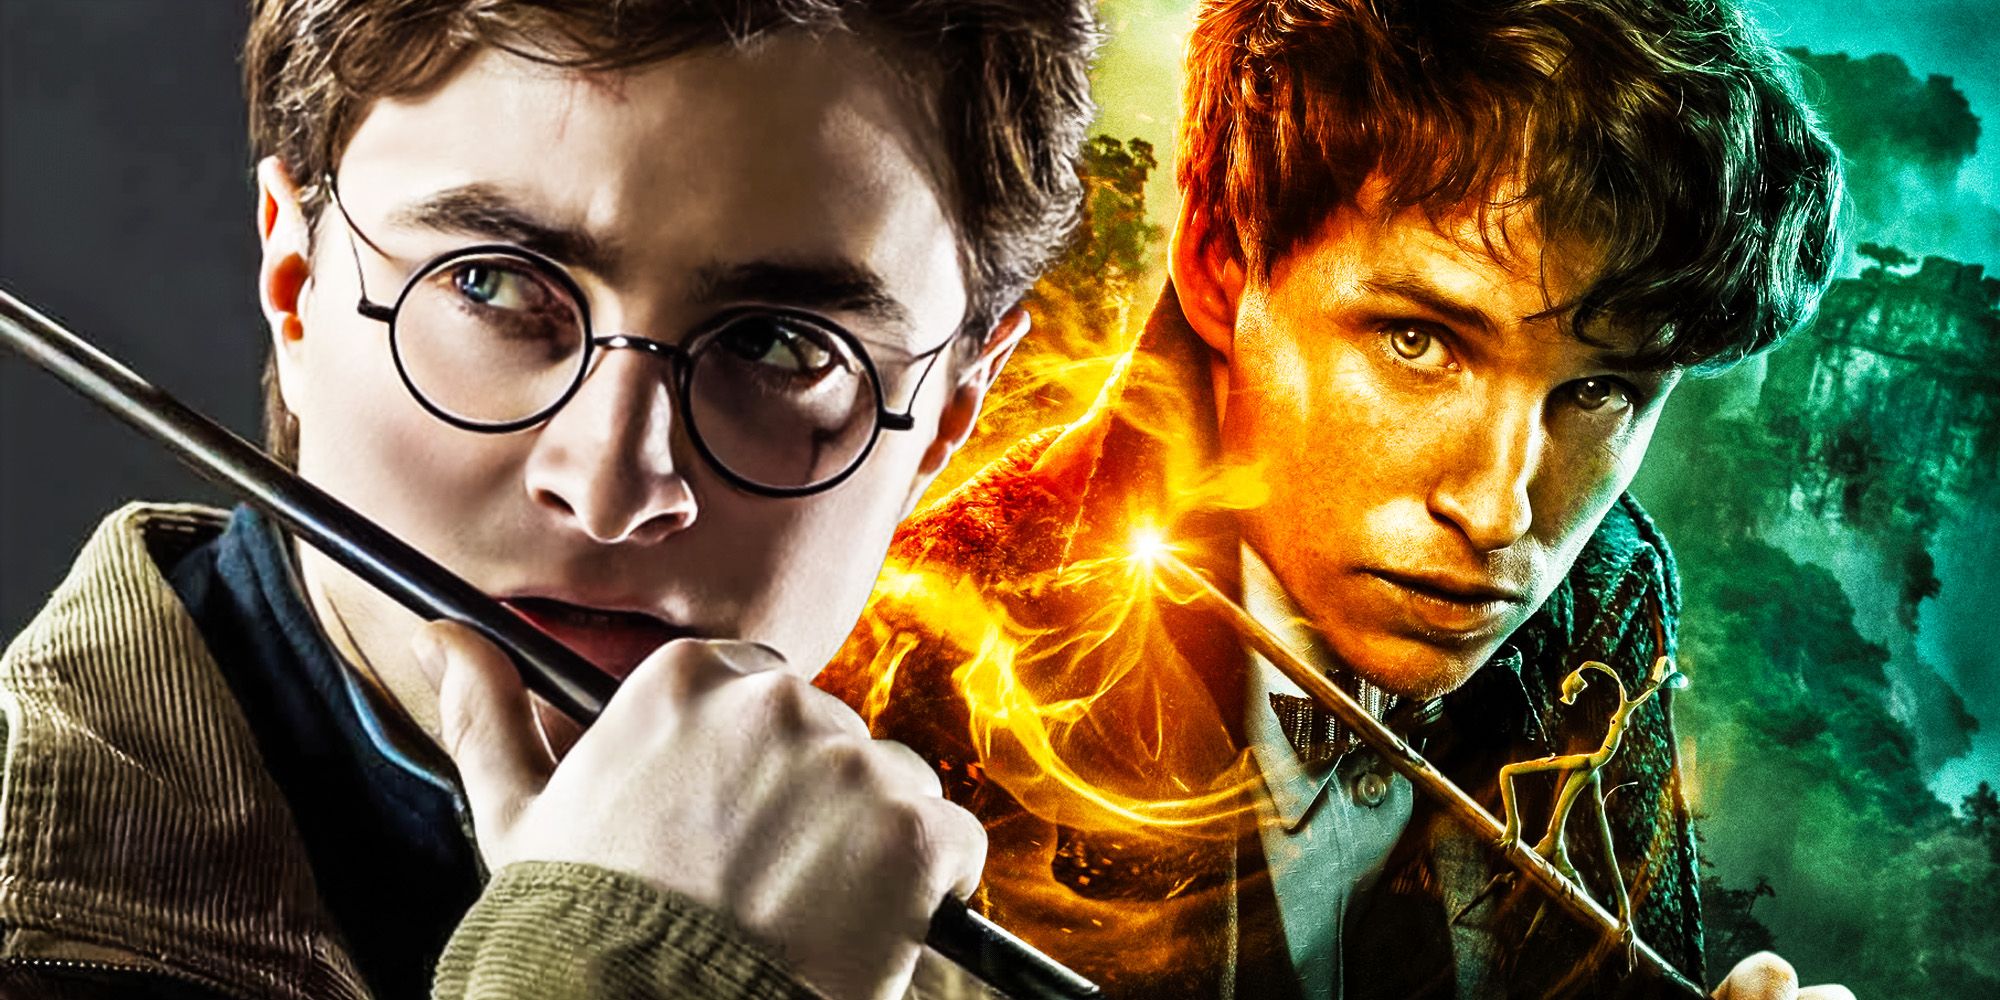 The Next Harry Potter Movie Has To Break An Old Wizarding World Trend